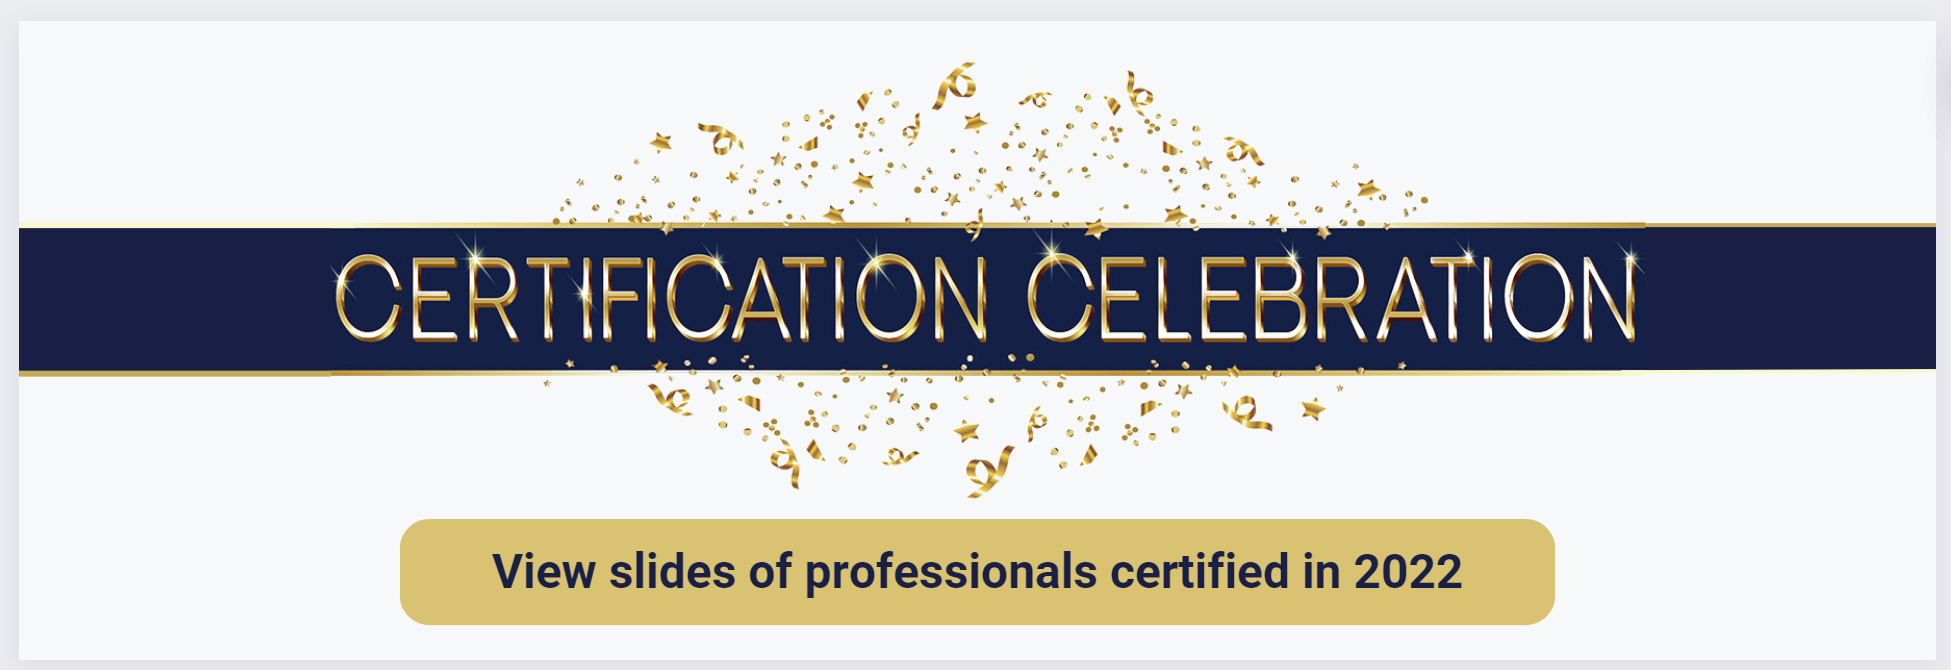 Certification Celebration - View slides of professionals certified in 2022